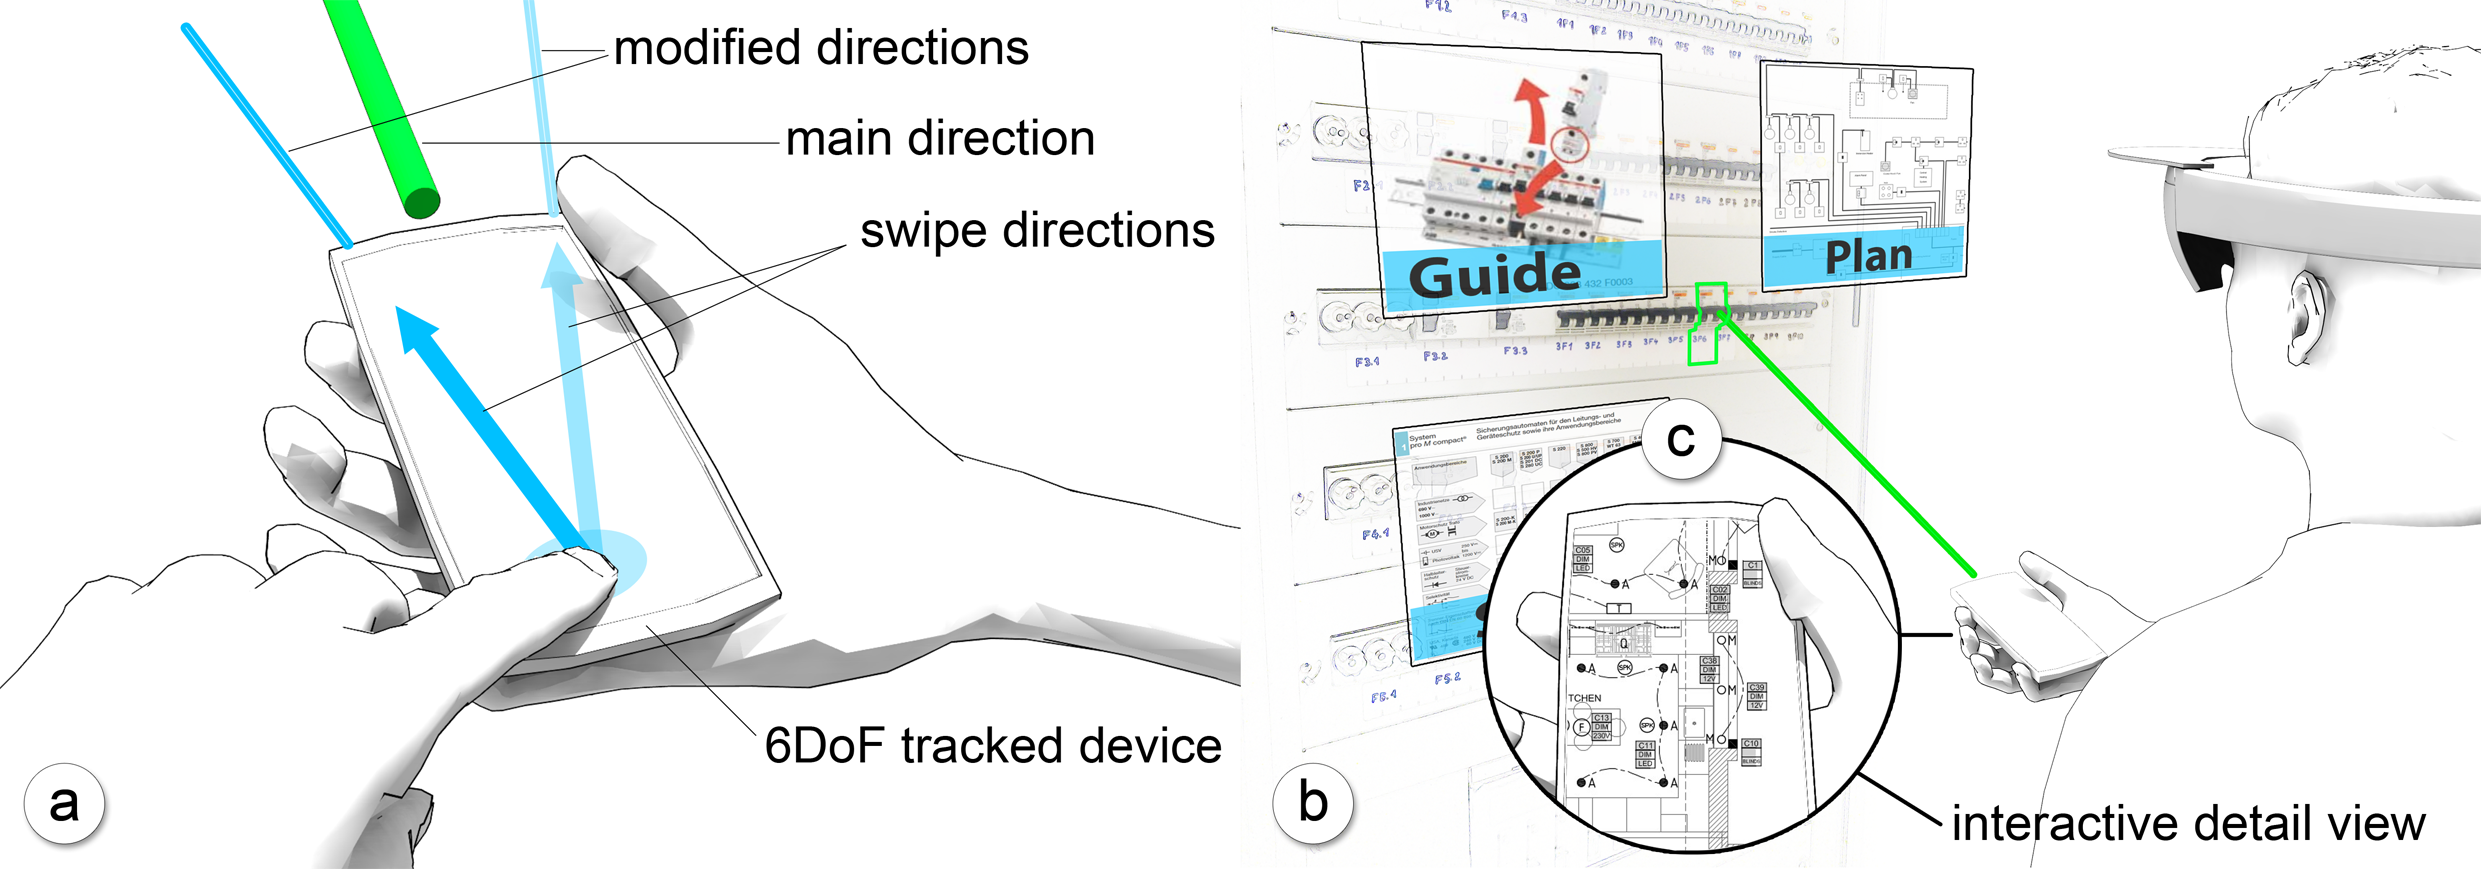 TrackCap enables new means of interaction. For example, rays for selecting objects can be quickly
			defined by swiping over the touchscreen (also see the accompanying video). (b) The high input and output fidelity of the
			smartphone can also be used to display detail of the selected objects and to enable high precision interactions with them